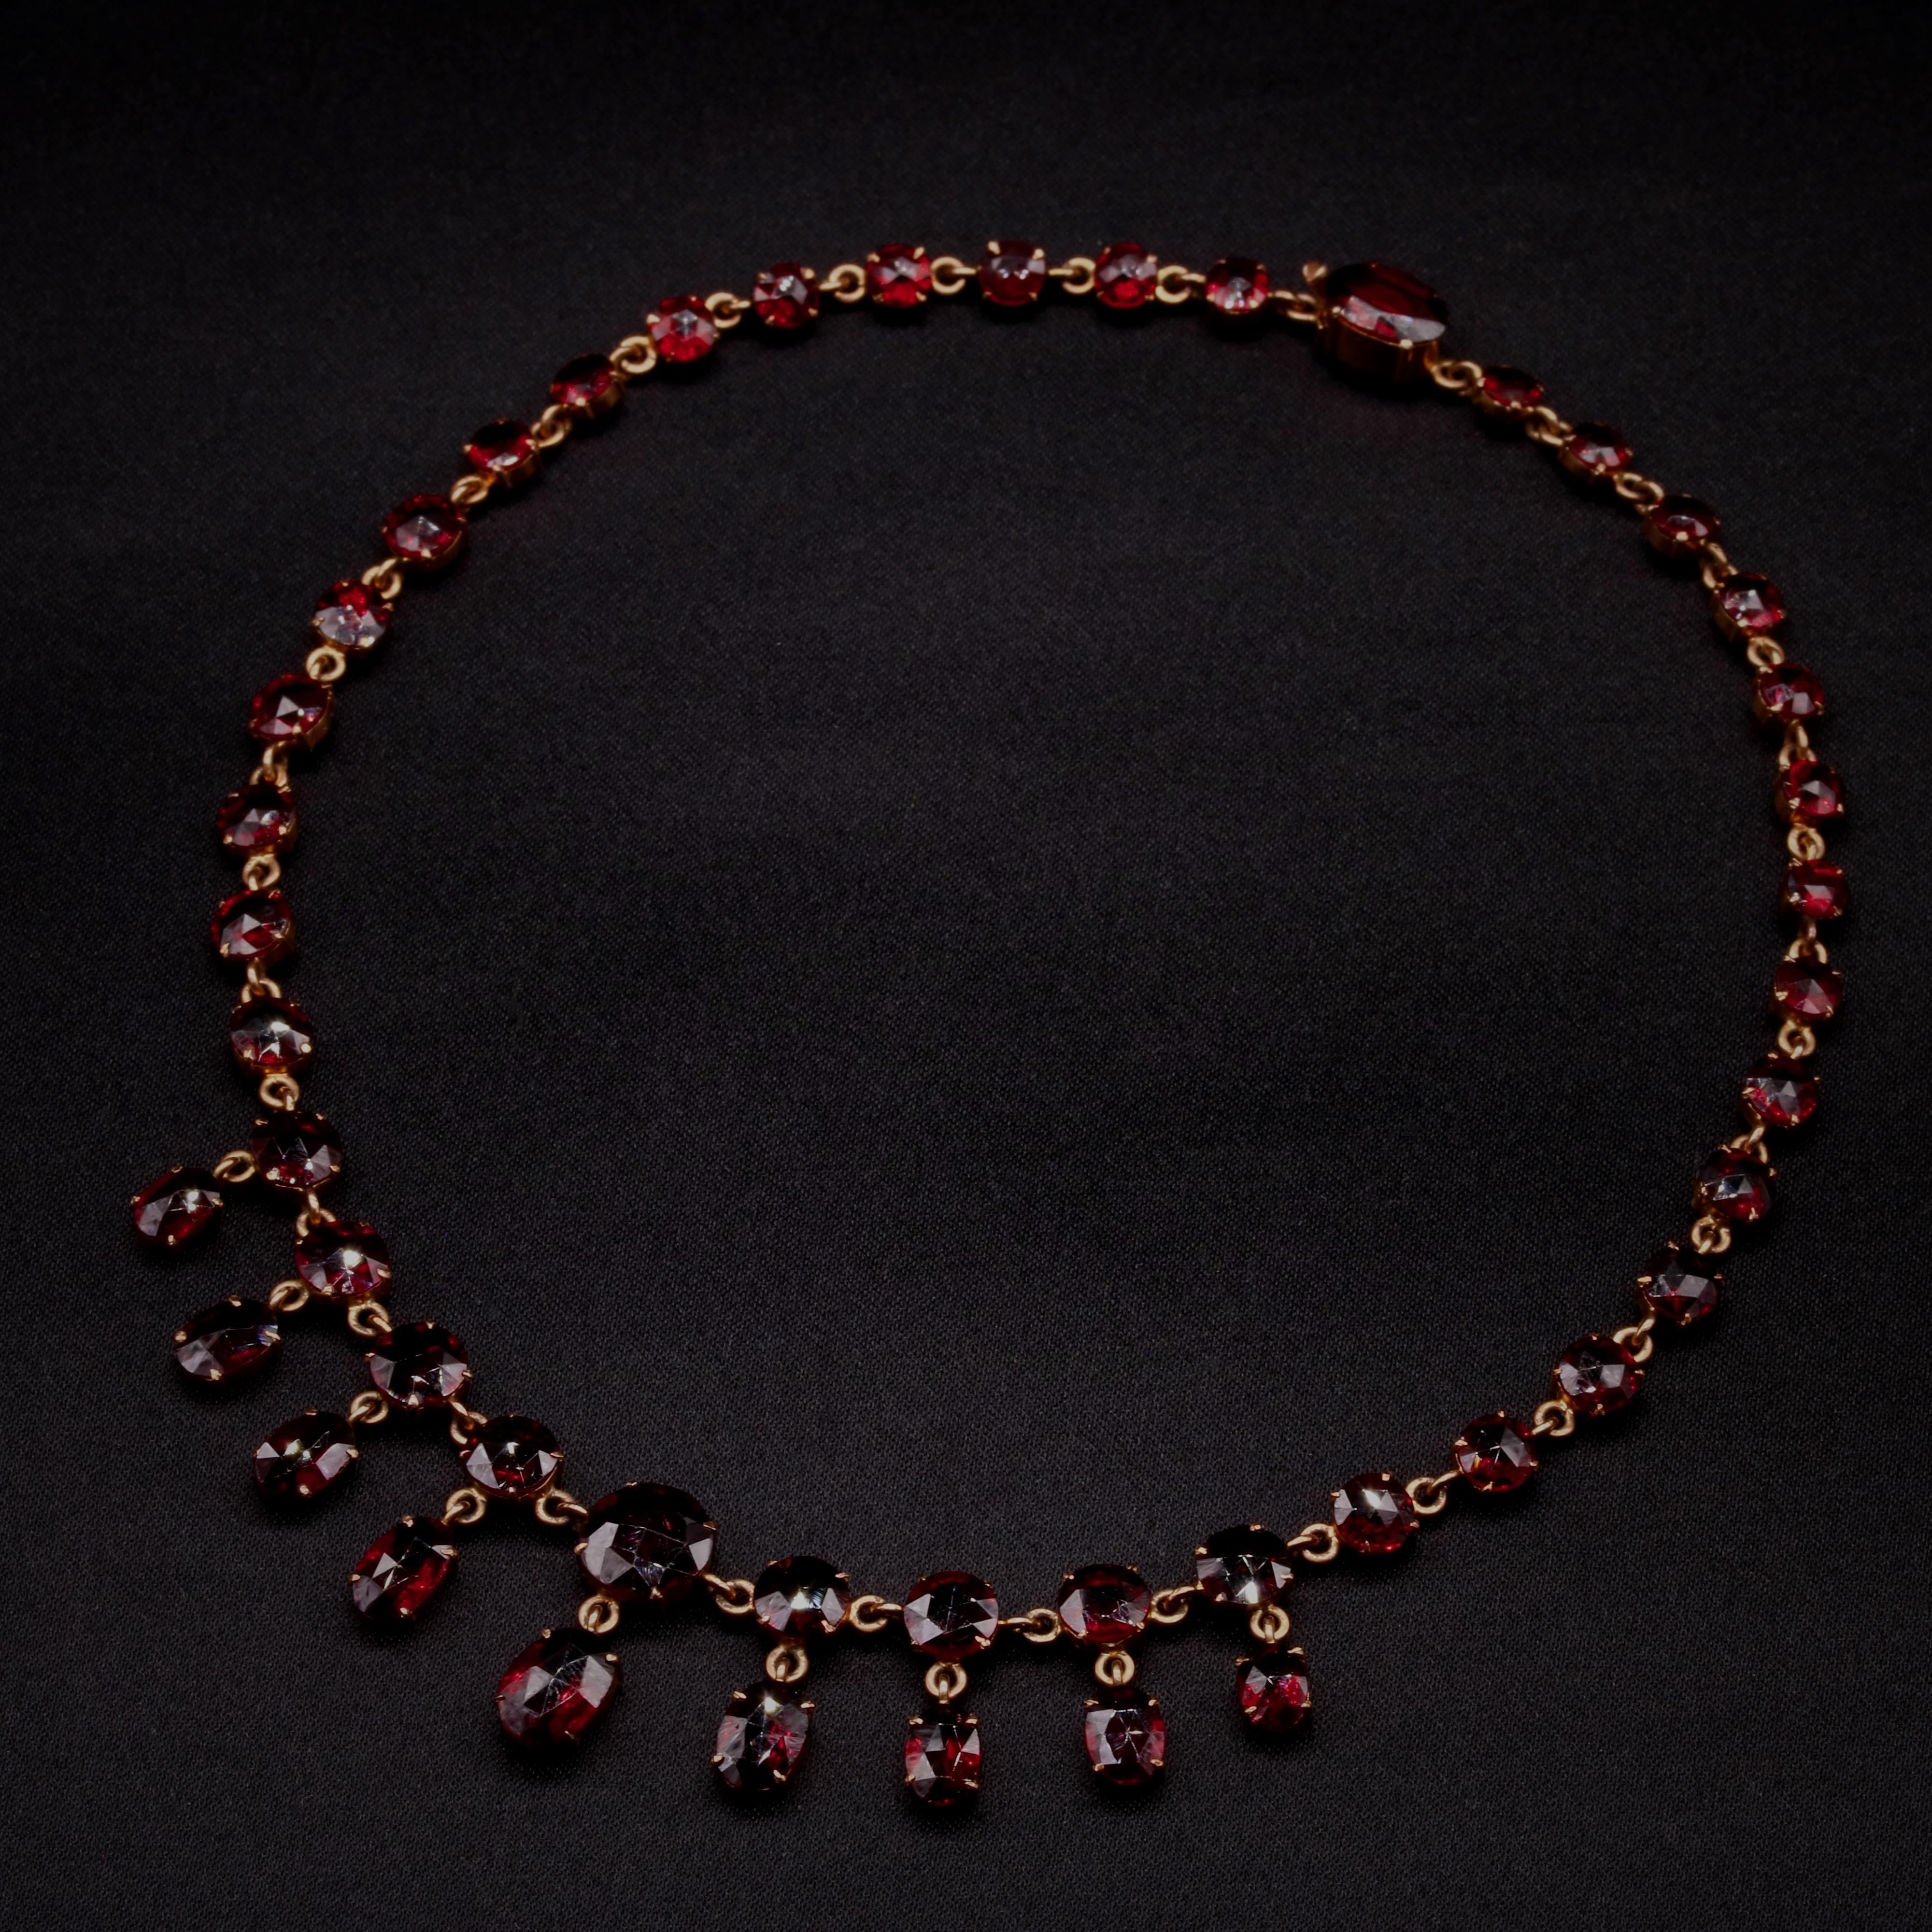 Antique Victorian 1870s Gold 48ctw Garnet Fringe Necklace in Original Fitted Box For Sale 1